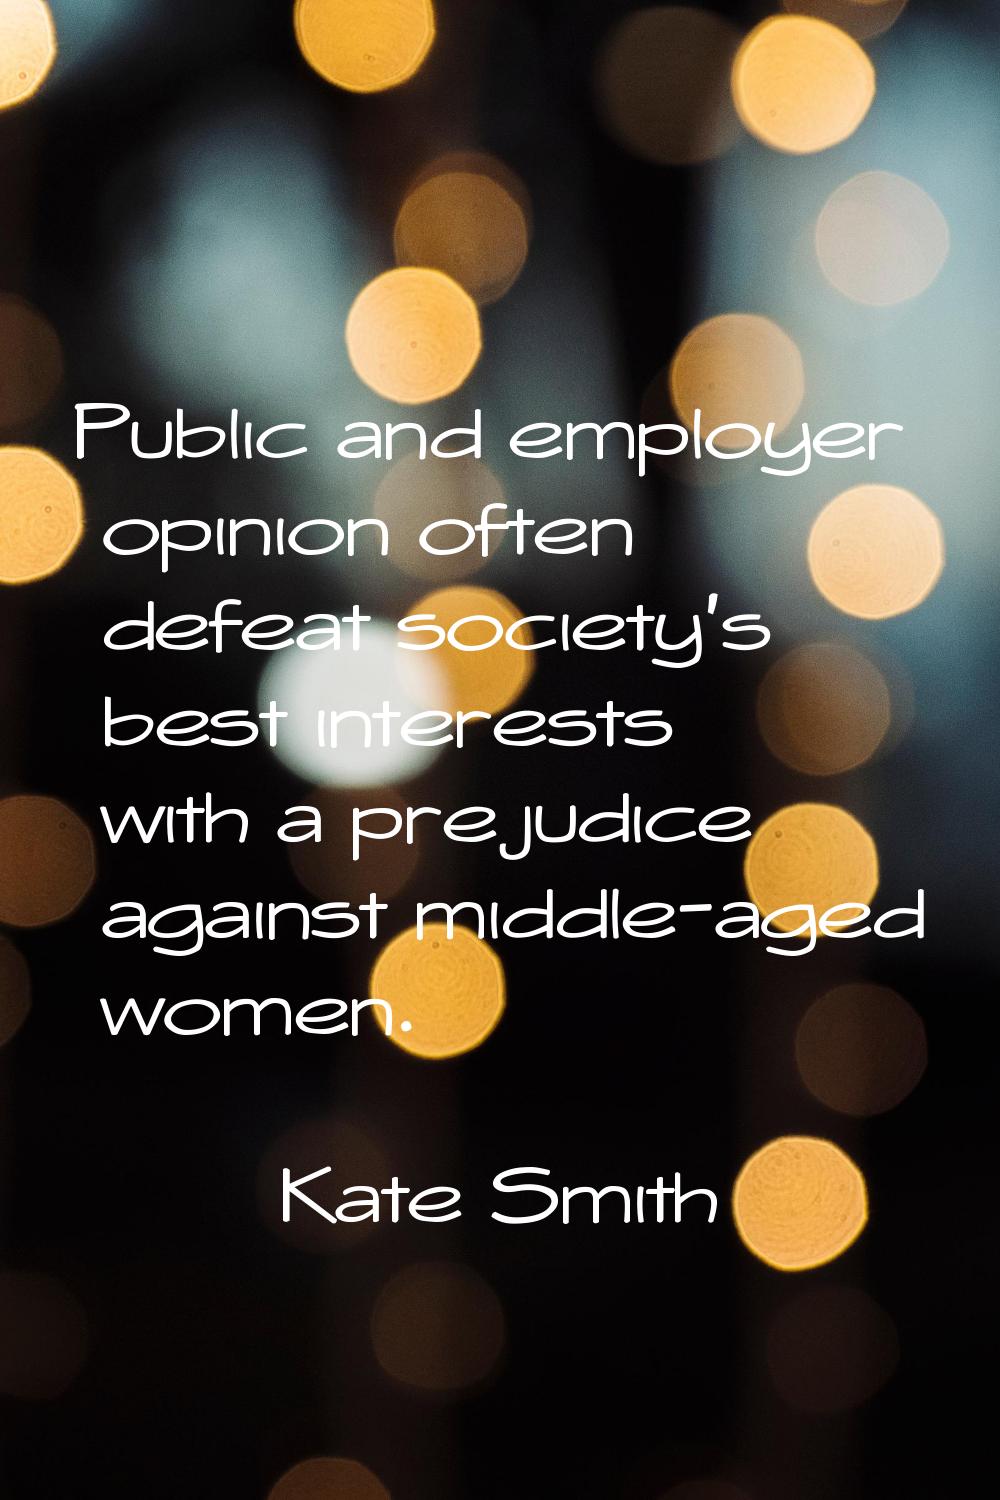 Public and employer opinion often defeat society's best interests with a prejudice against middle-a